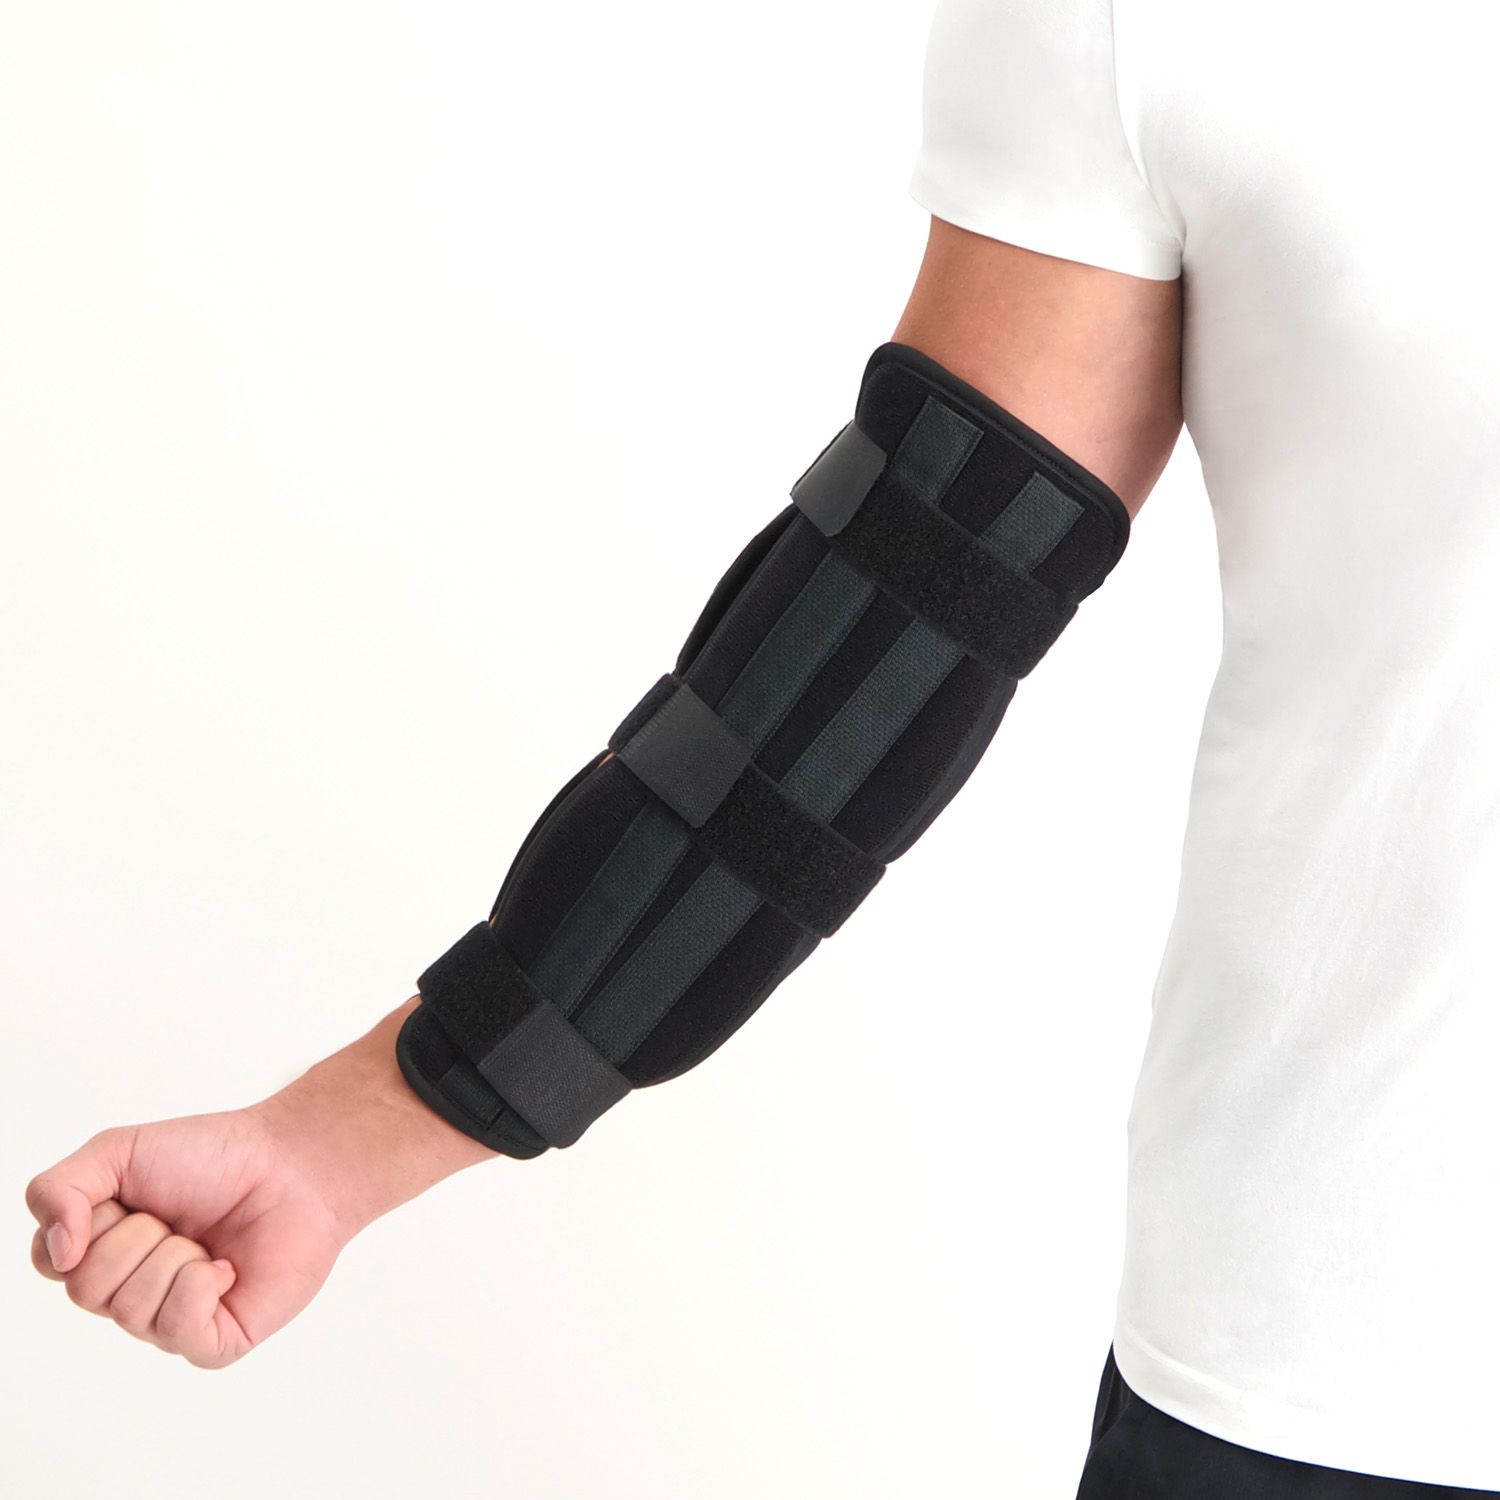 super ortho elbow lower arm splint product information